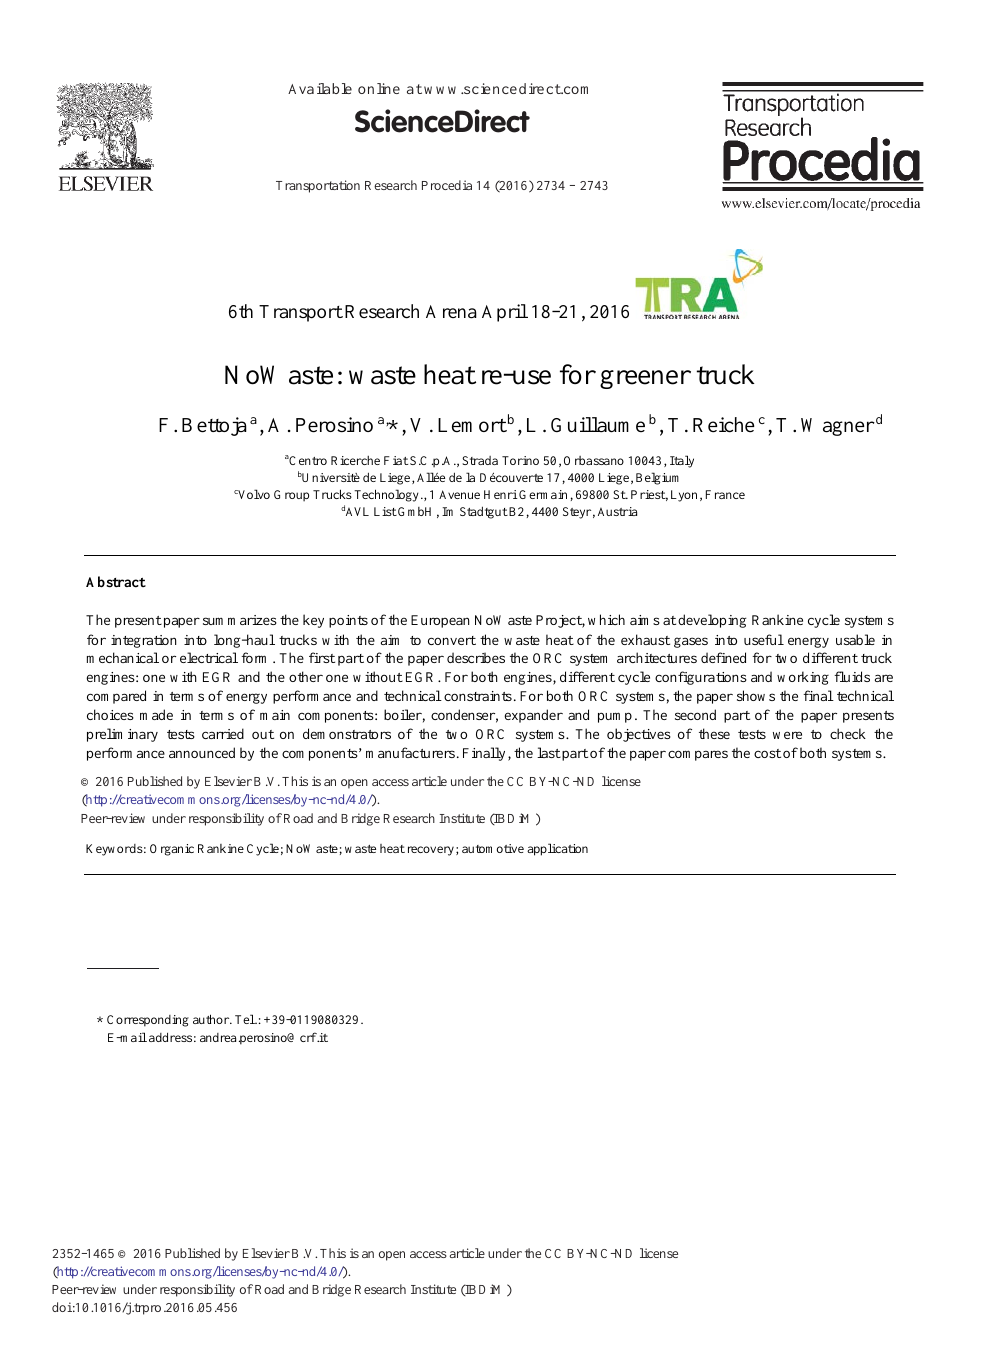 Nowaste Waste Heat Re Use For Greener Truck Topic Of Research Paper In Materials Engineering Download Scholarly Article Pdf And Read For Free On Cyberleninka Open Science Hub